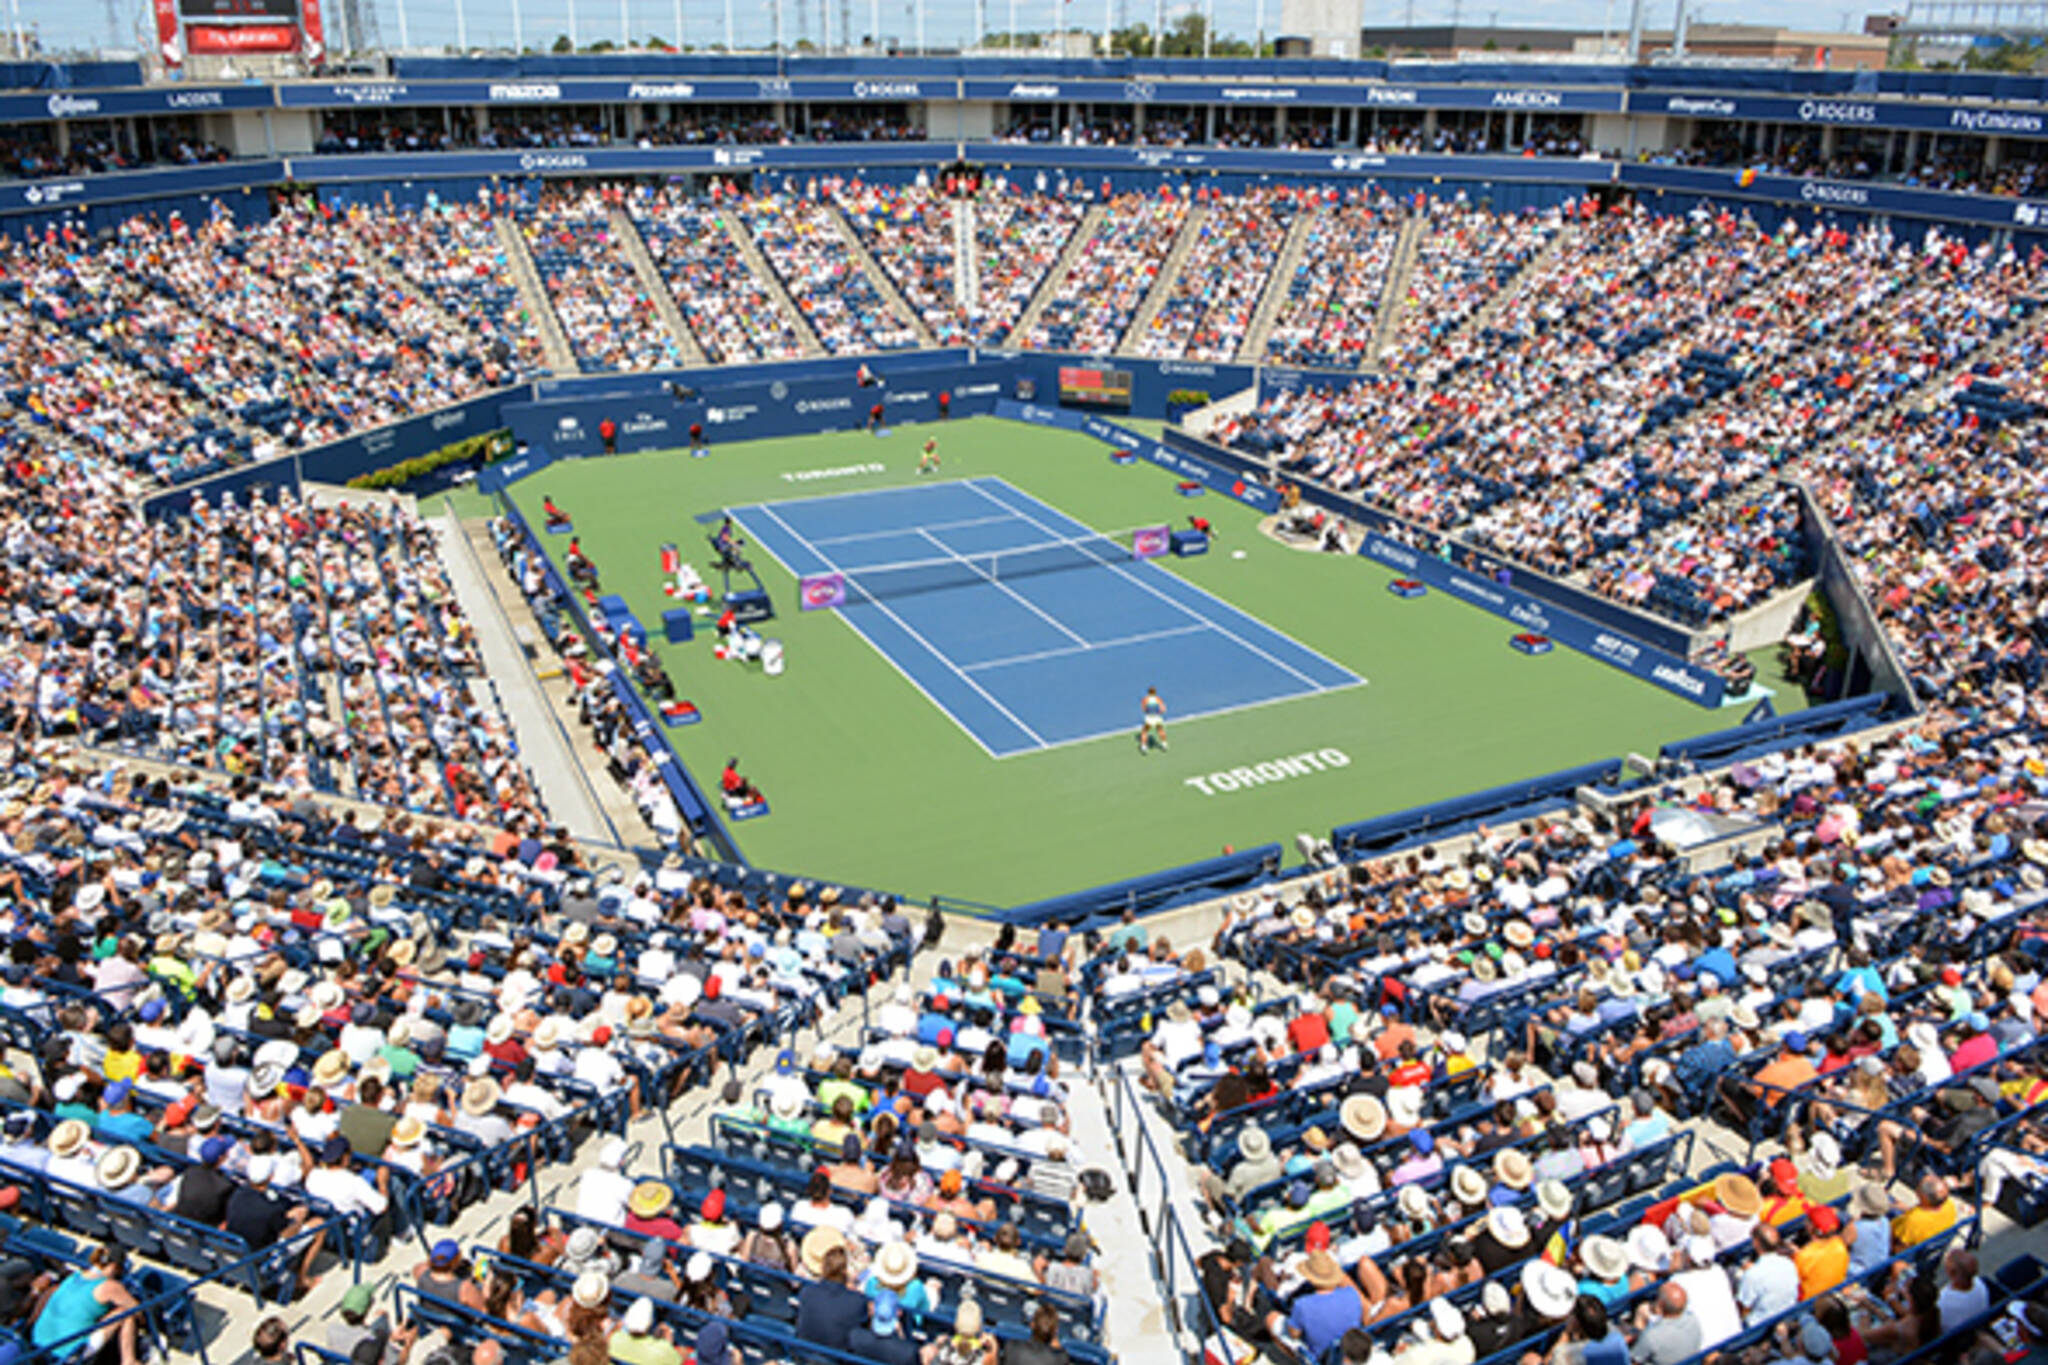 What you need to know about the 2016 Rogers Cup